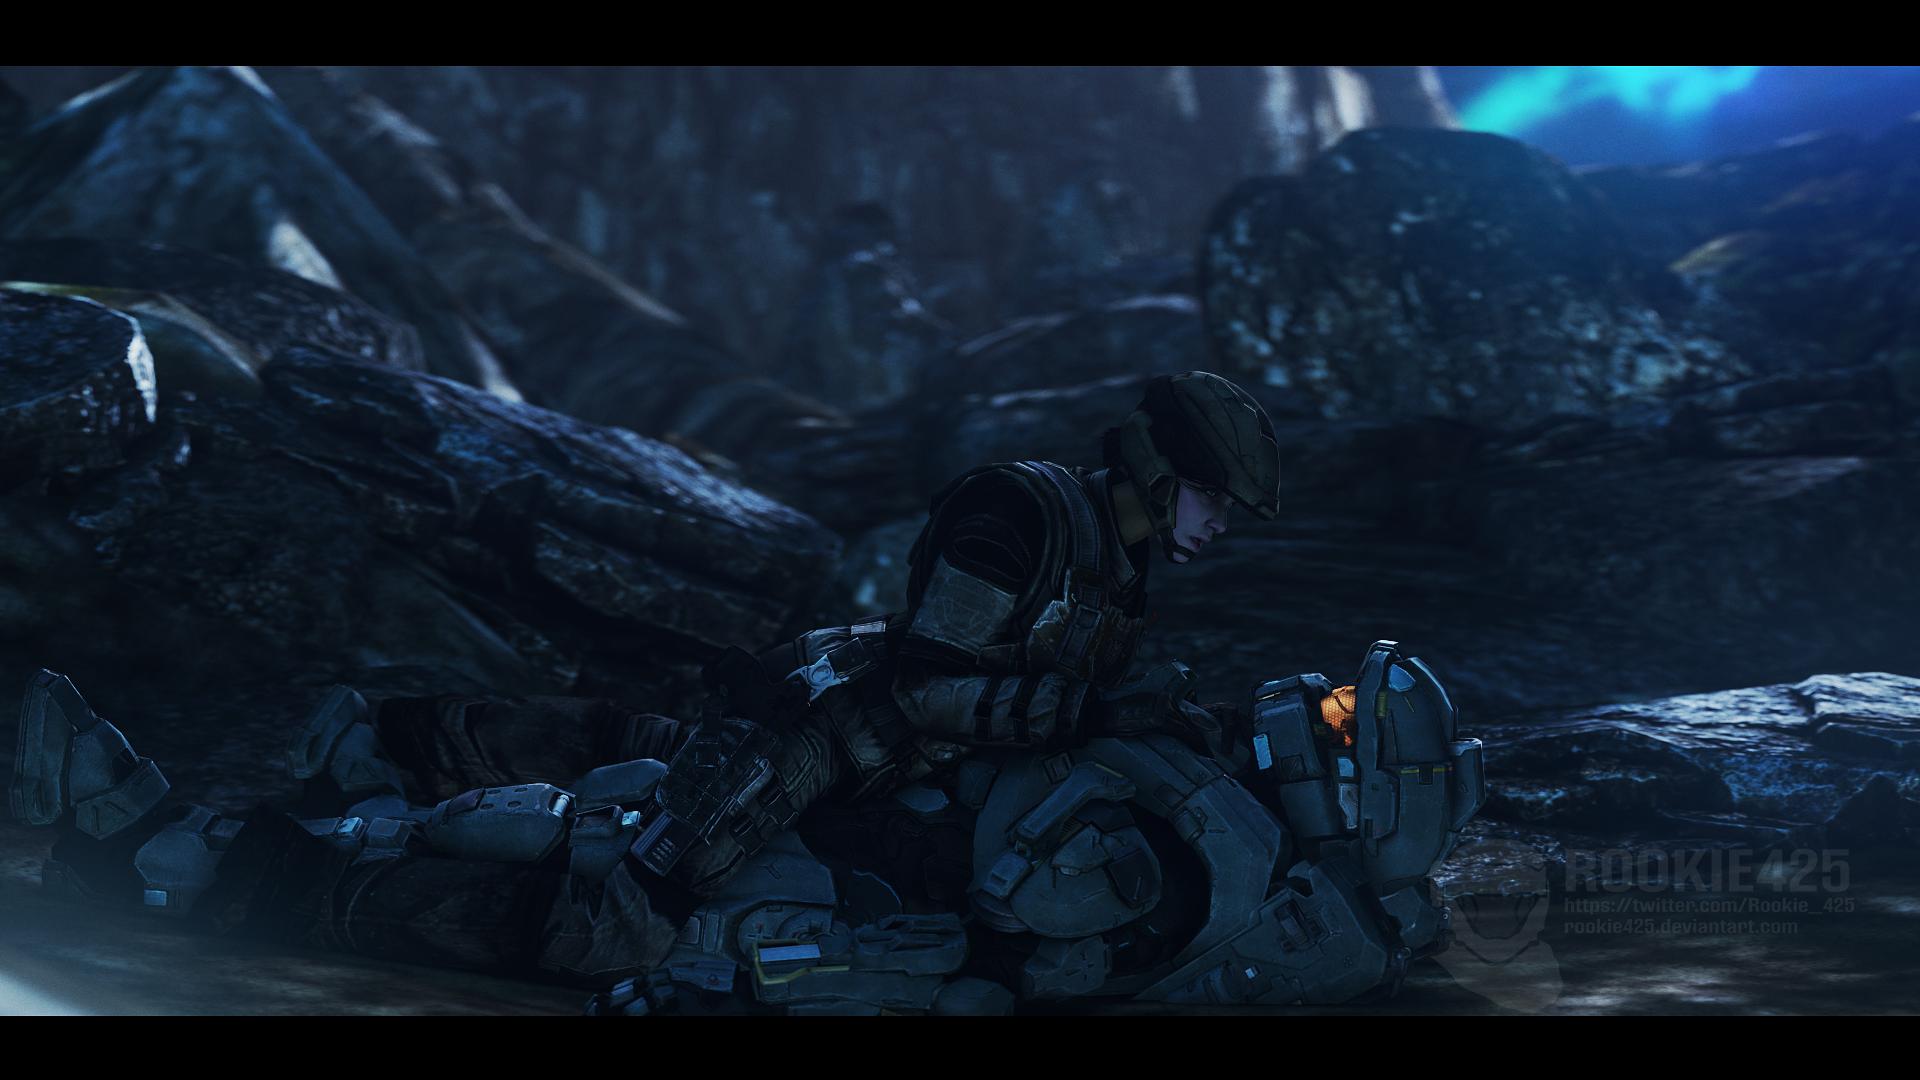 handicappet nedadgående Ledig Rookie425 on Twitter: "A little reimagining of that one scene from #Halo: Last  Light where Veta had to use Fred as a tobaggan. https://t.co/bGAzFRlOn9" /  Twitter